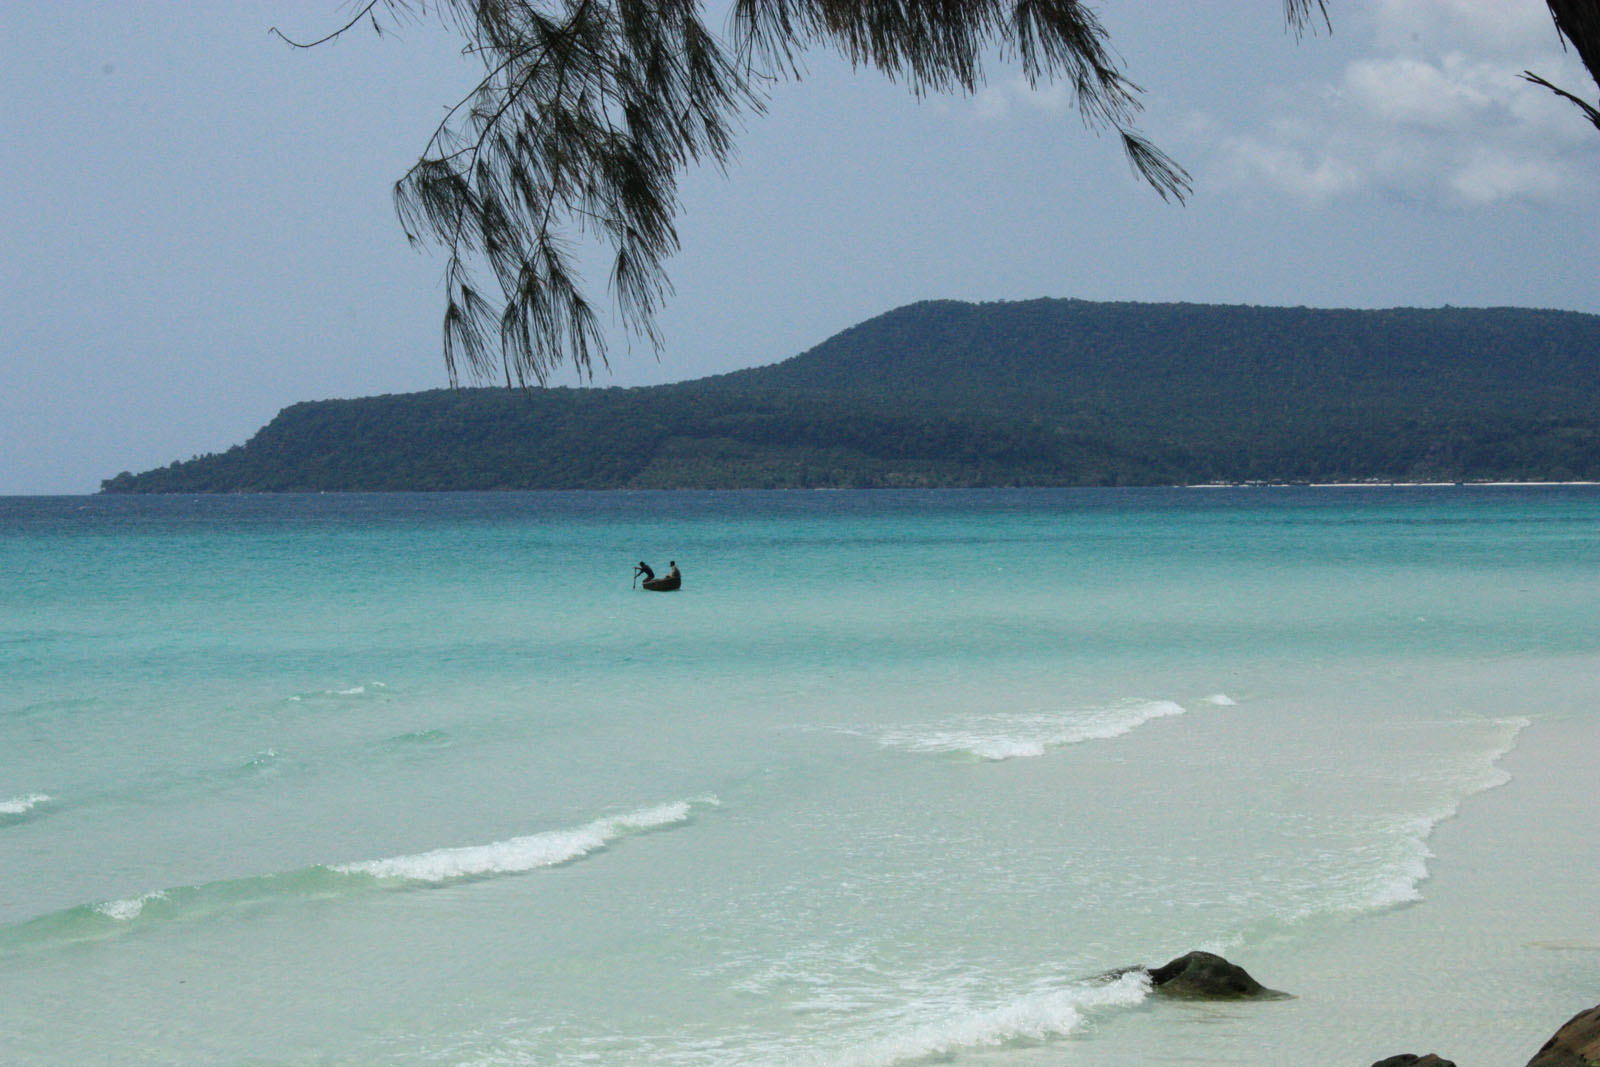 Impressions of Koh Rong in 2010